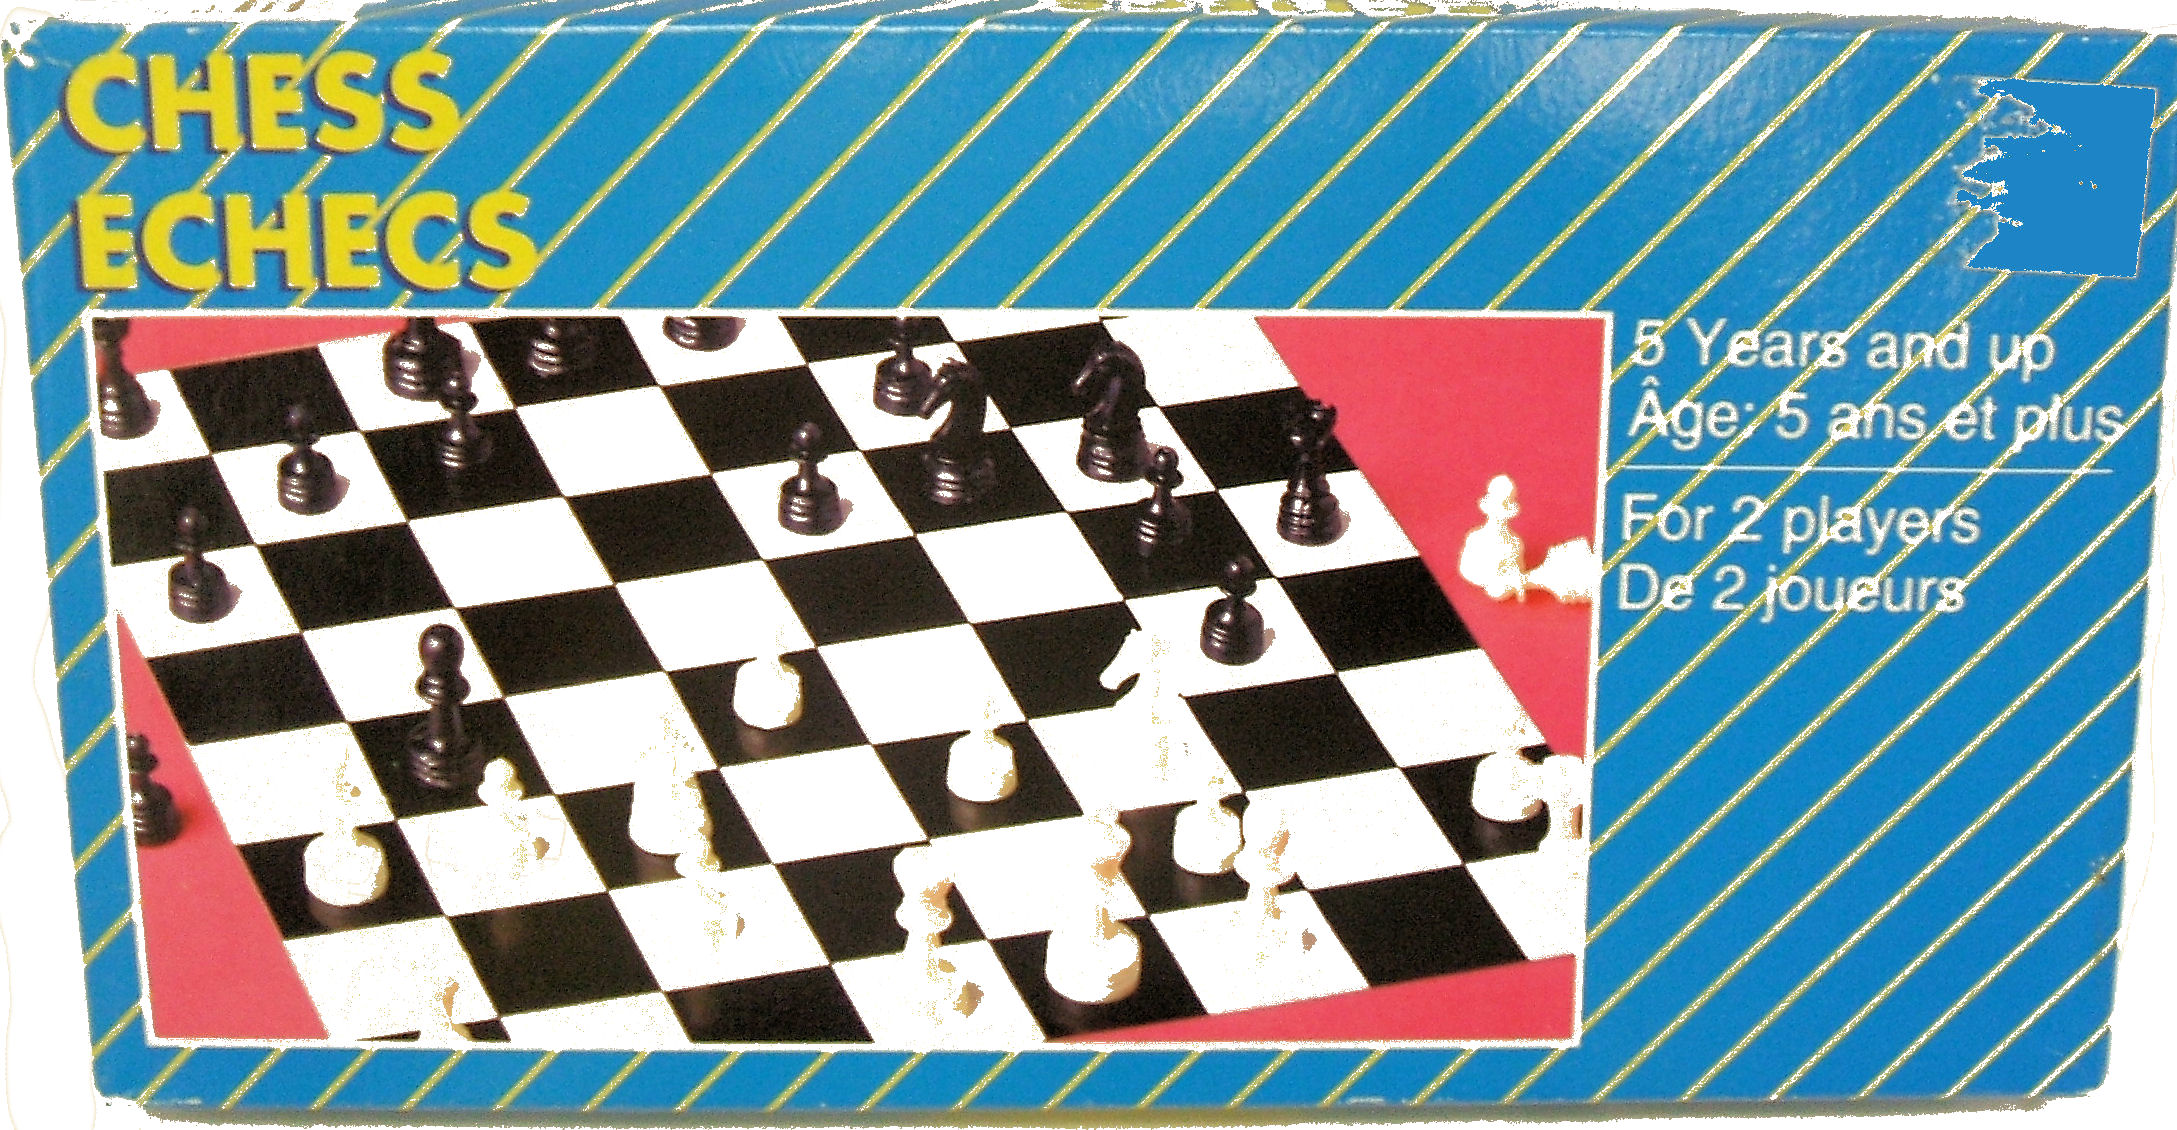 Another Canadian chess set